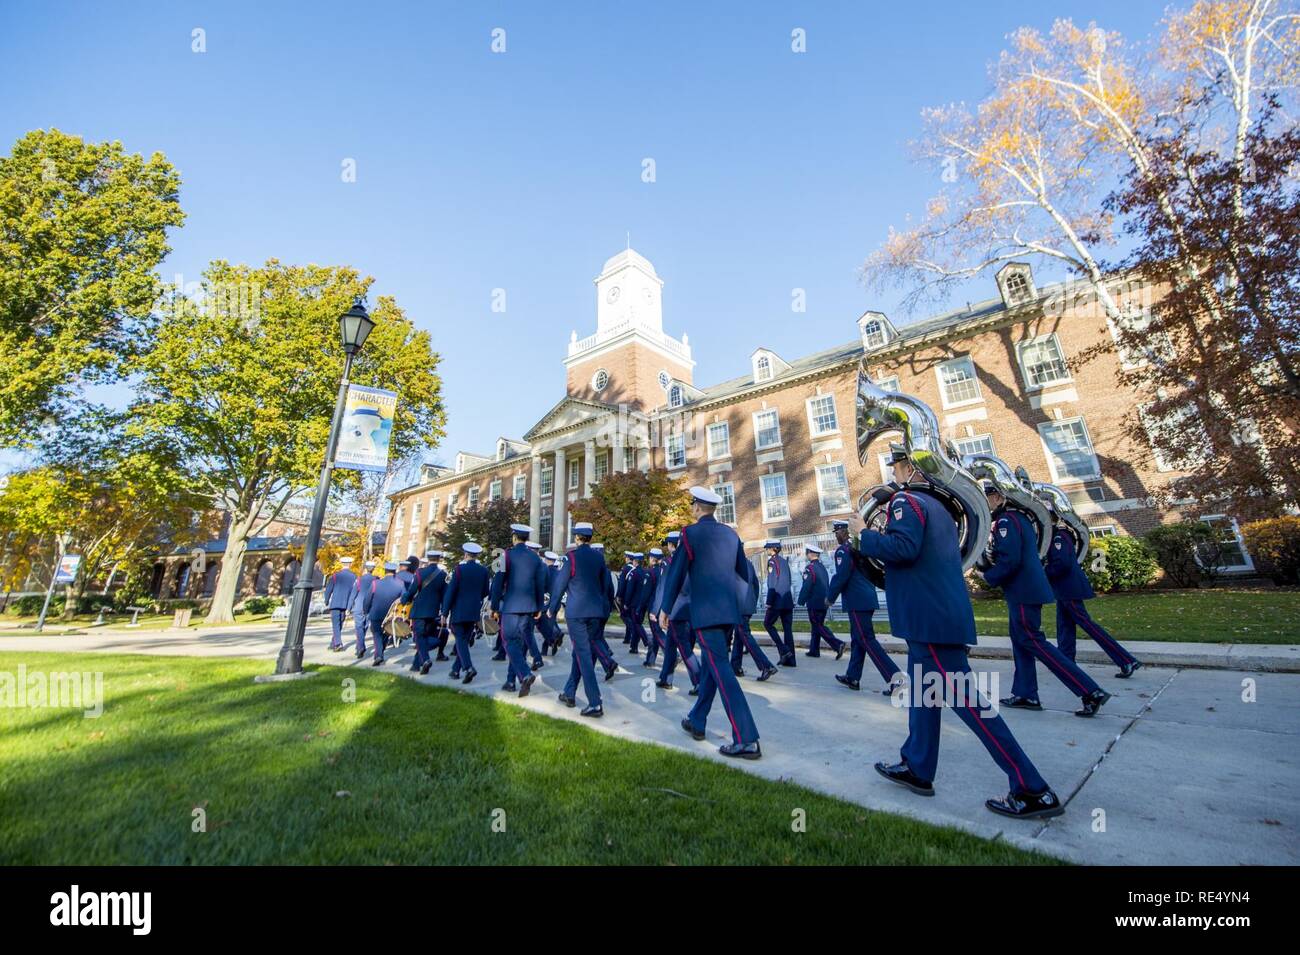 NEW LONDON, Conn - Members of the U.S. Coast Guard band march in formation during a photoshoot and rehearsal, Nov. 9, 2016. Stock Photo